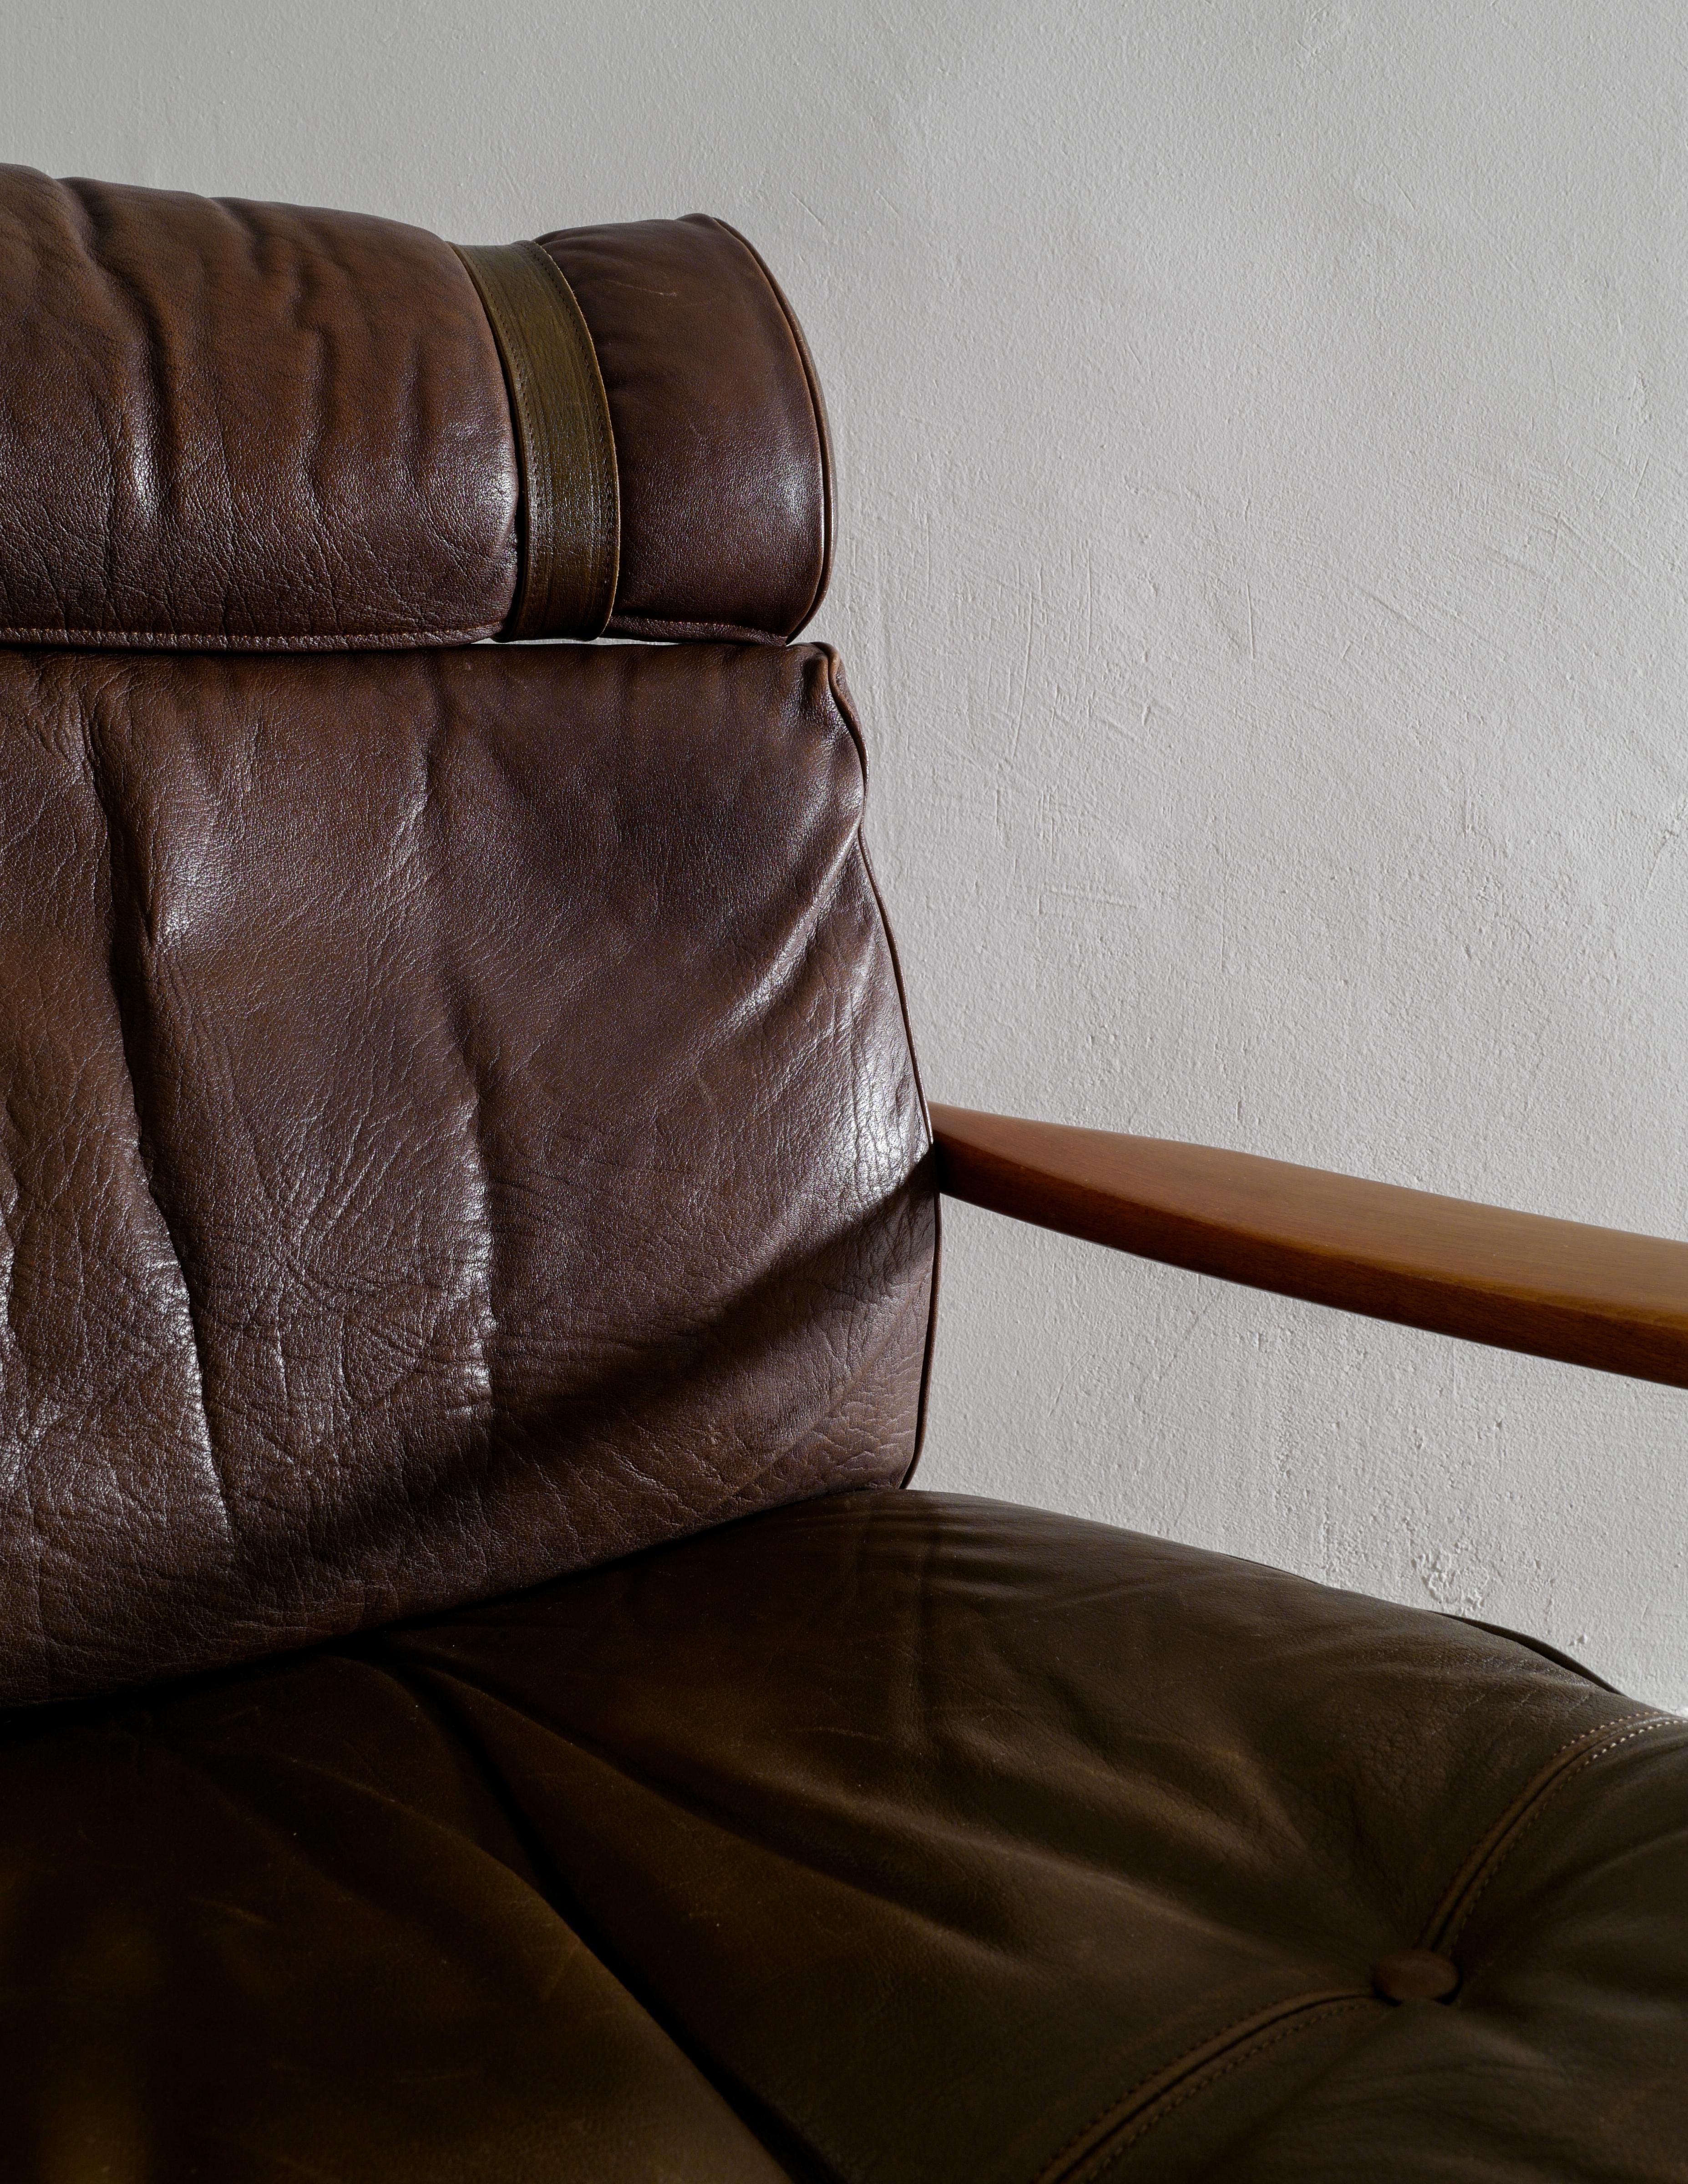 Mid-20th Century Leather Arm Easychair by Ingemar Thillmark Produced by OPE Möbler, Sweden, 1960s For Sale